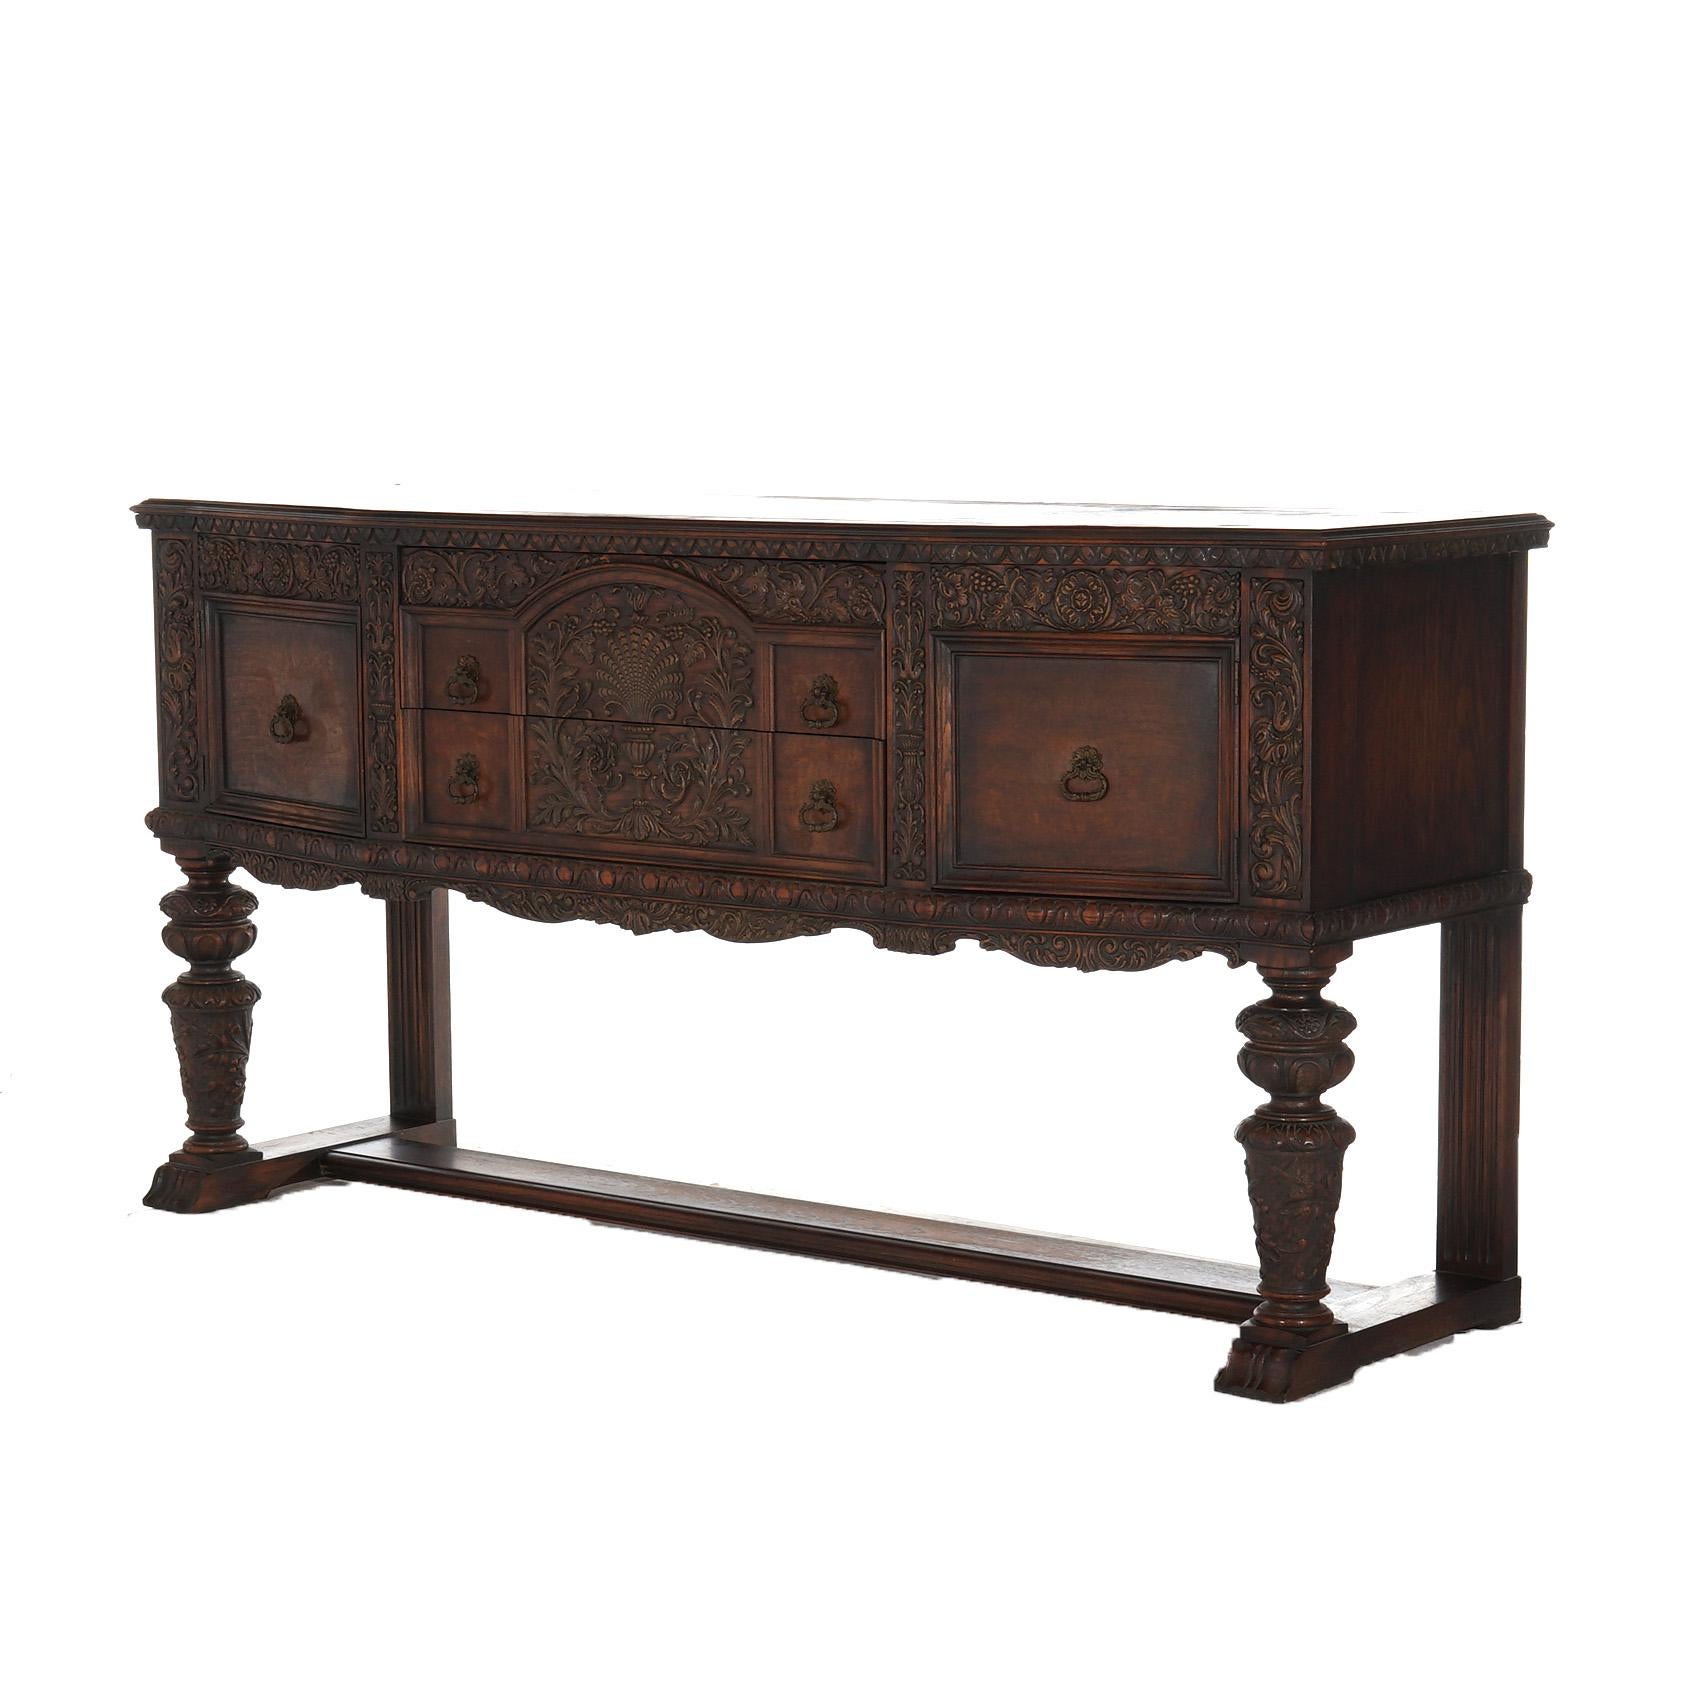 ***Ask About Reduced In-House Delivery Rates - Reliable Professional Service & Fully Insured***

Antique Jacobean Foliate & Shell Carved Oak & Walnut Sideboard with Balustrade Legs C1900

Measures - 37